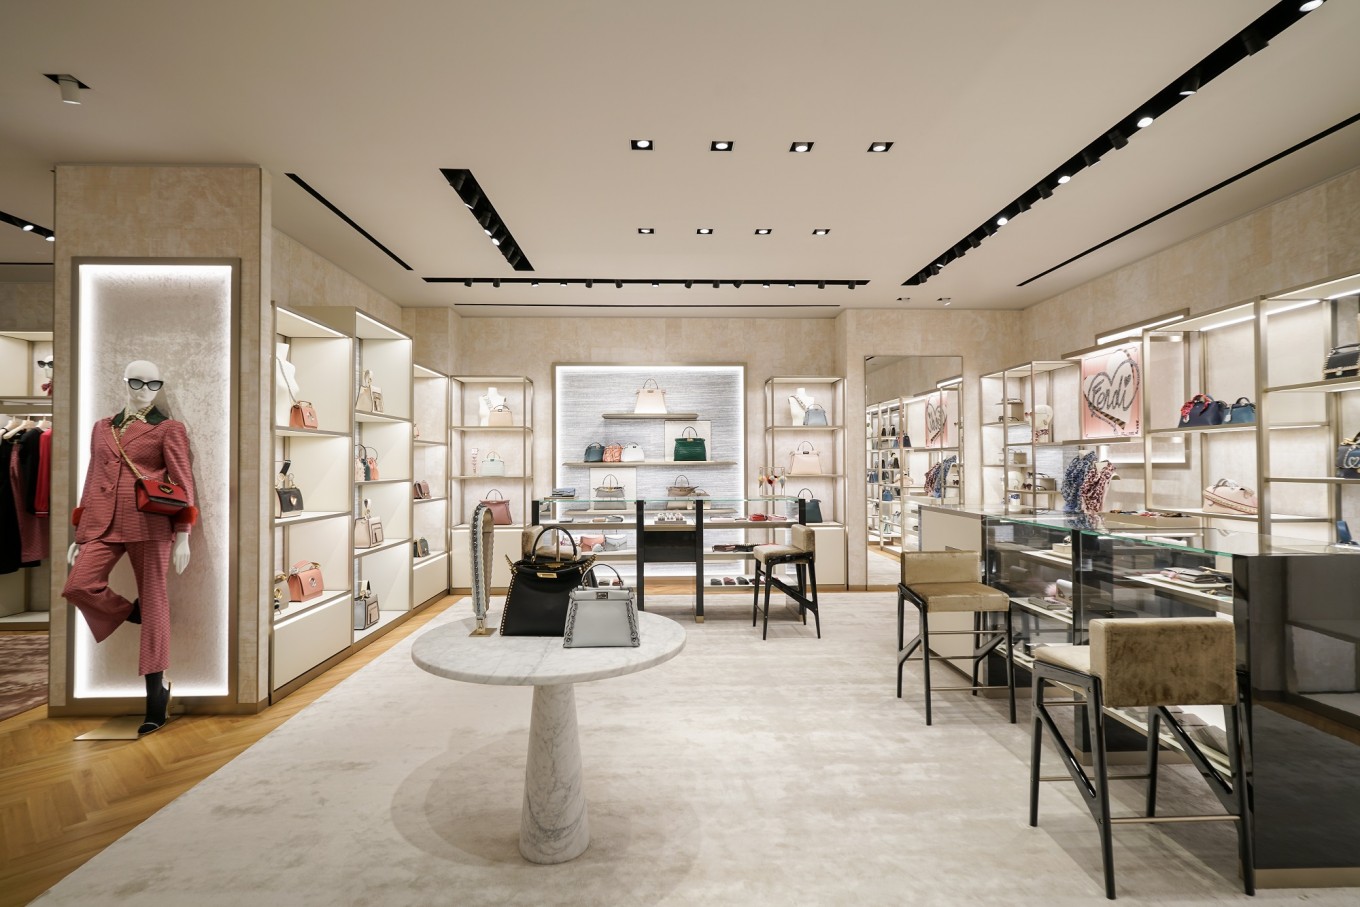 Fendi reopens newly renovated boutique in Jakarta - Lifestyle - The ...